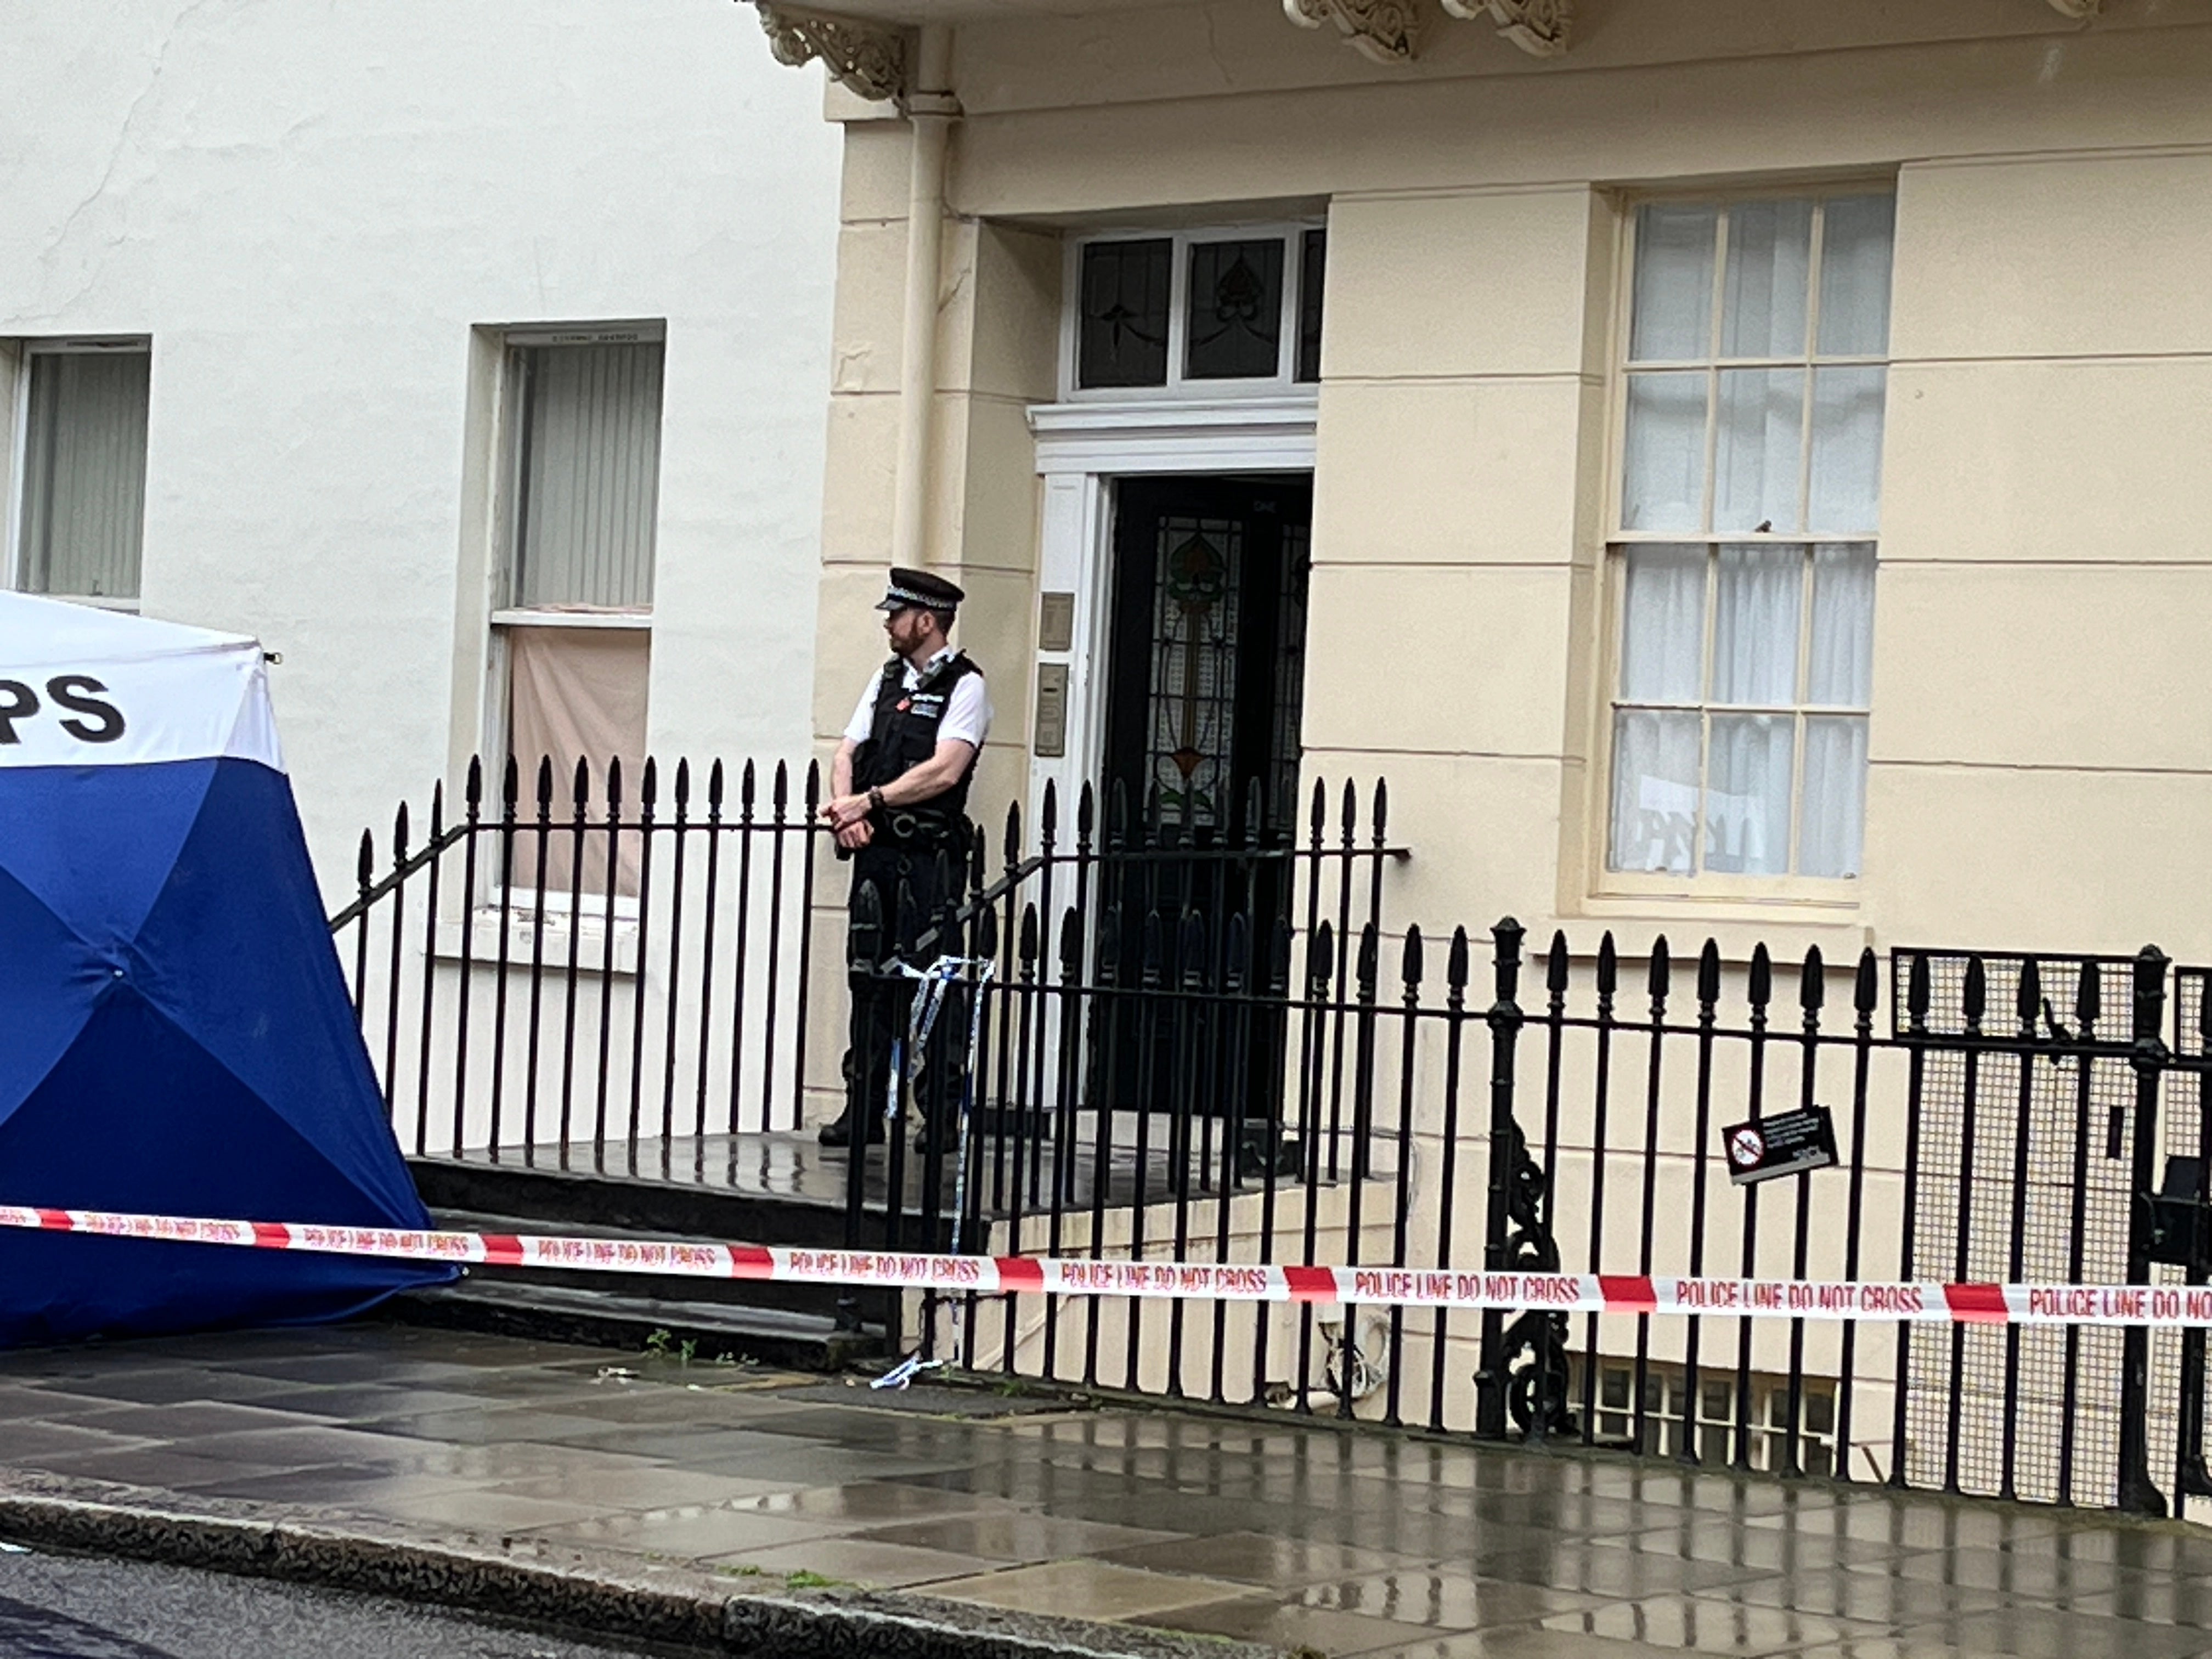 Police officer guards the scene after a baby was found dead